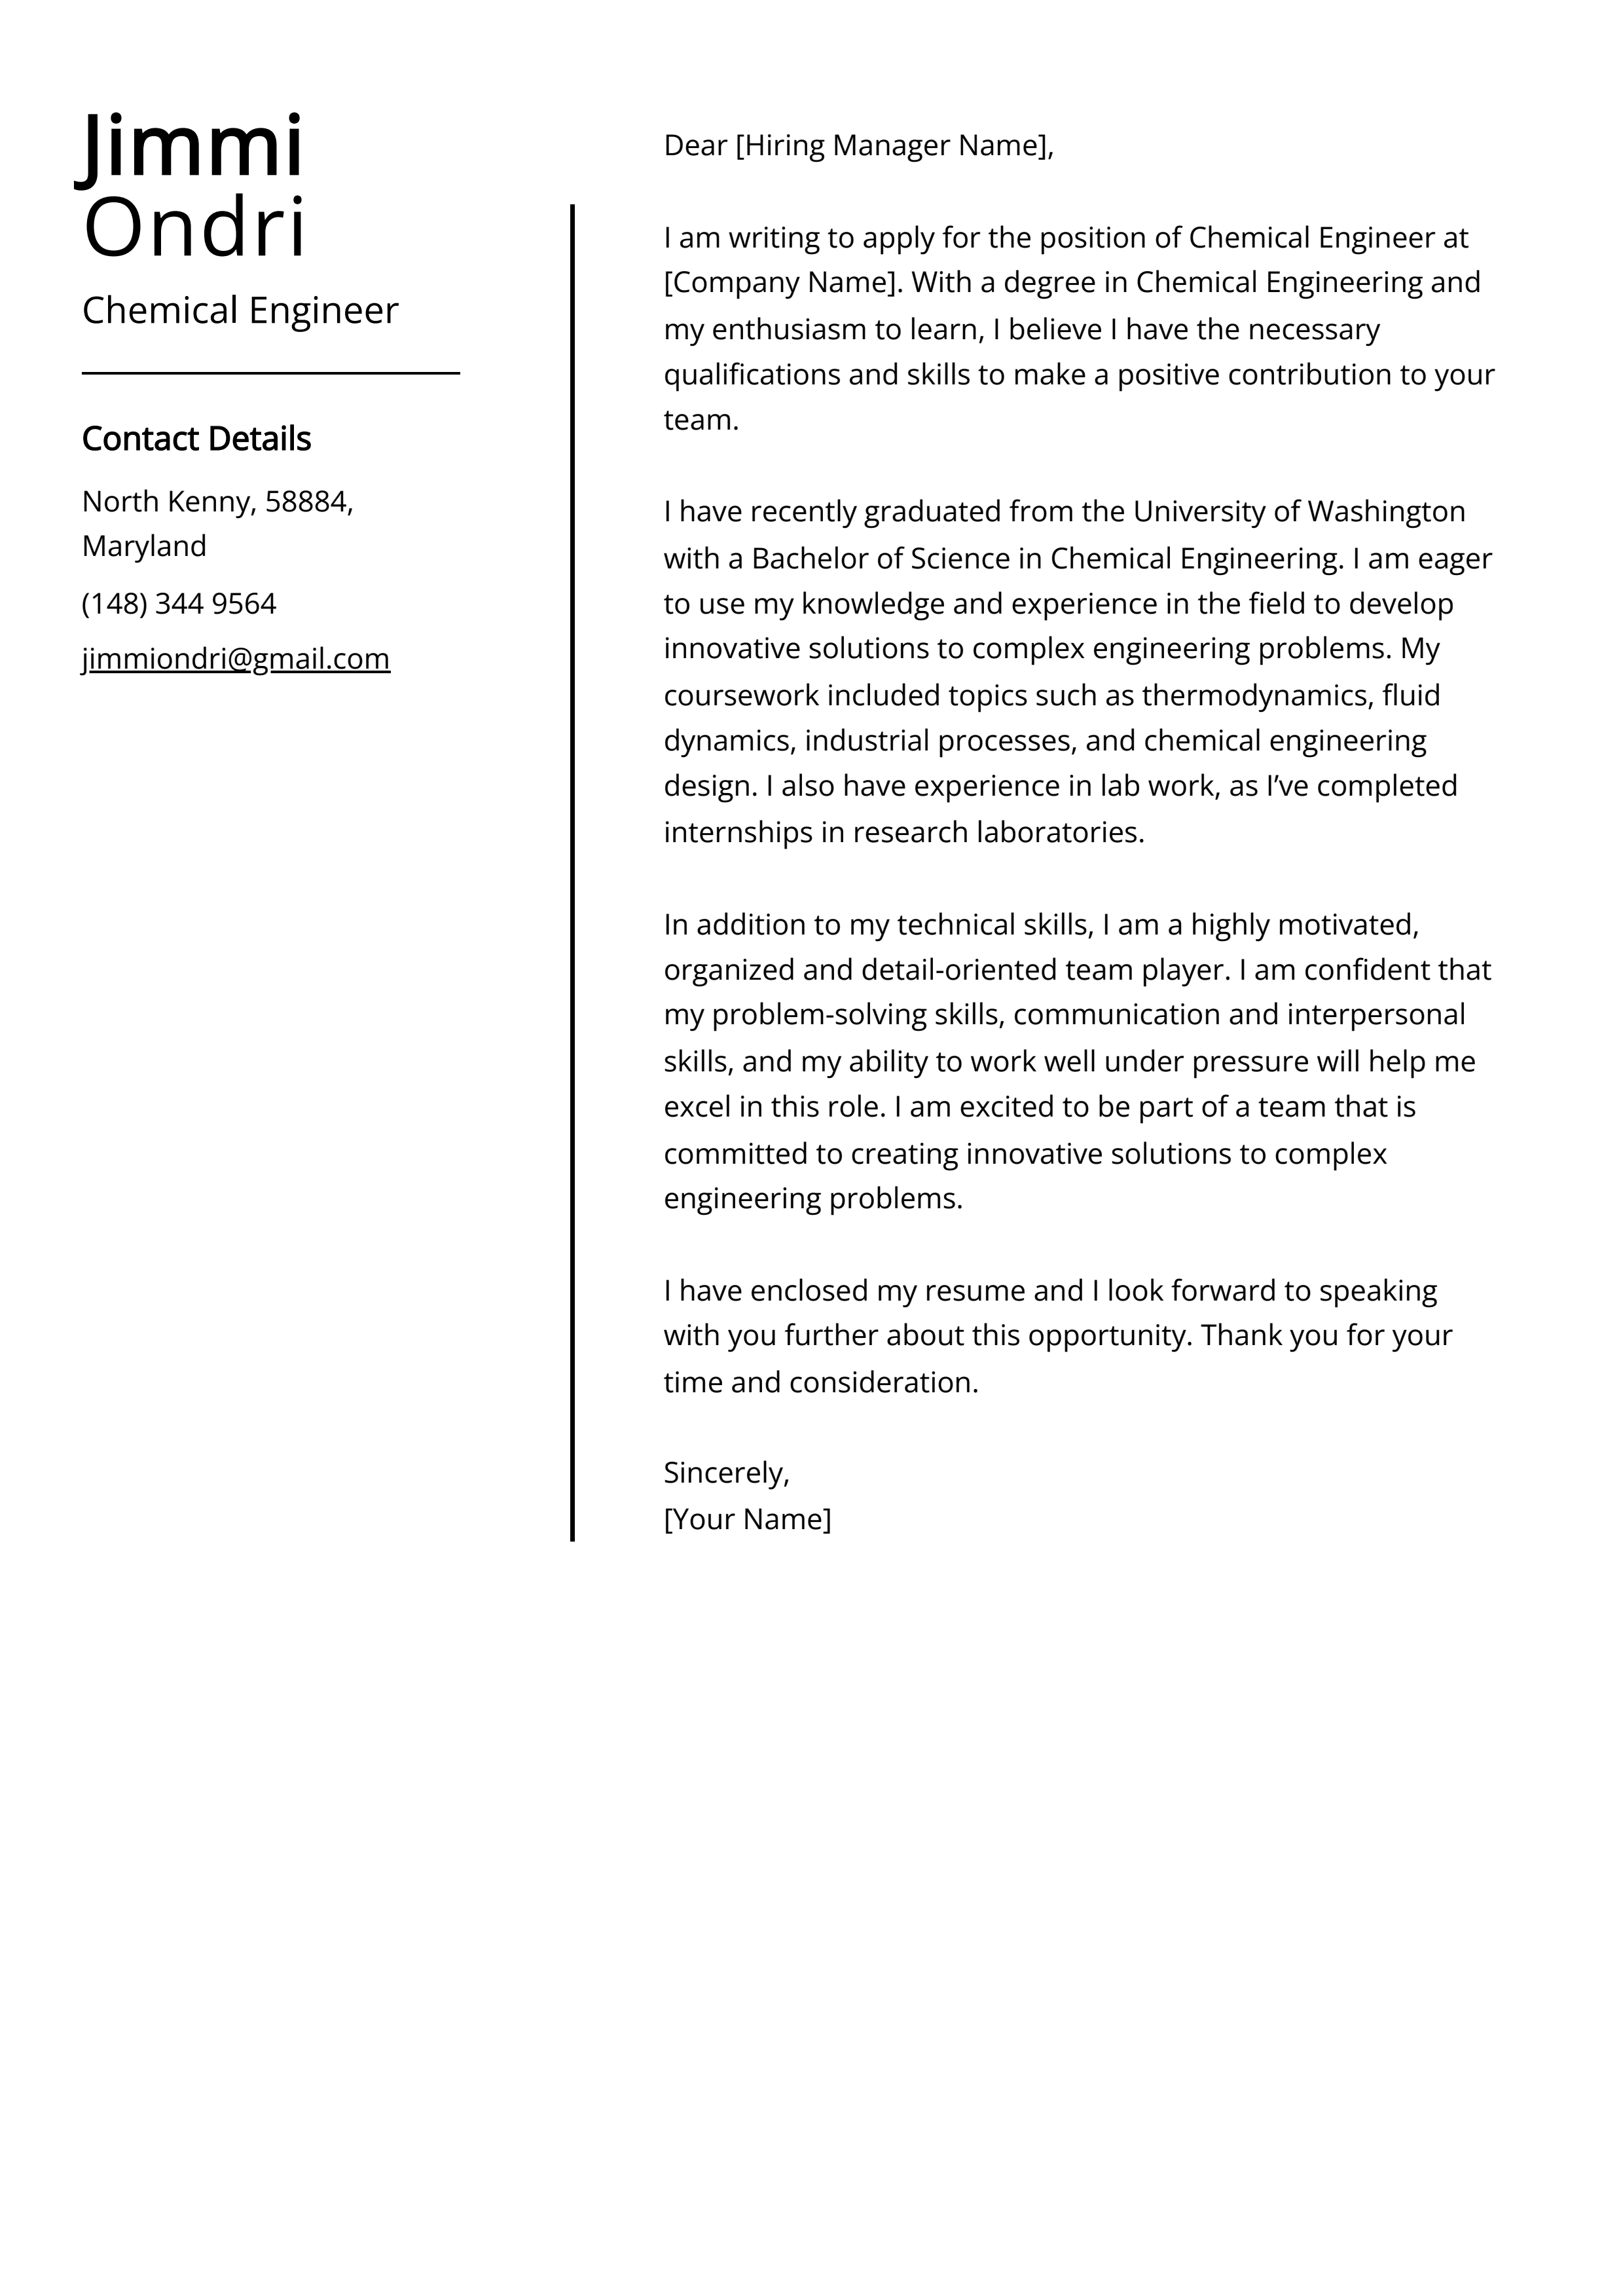 Chemical Engineer Cover Letter Example